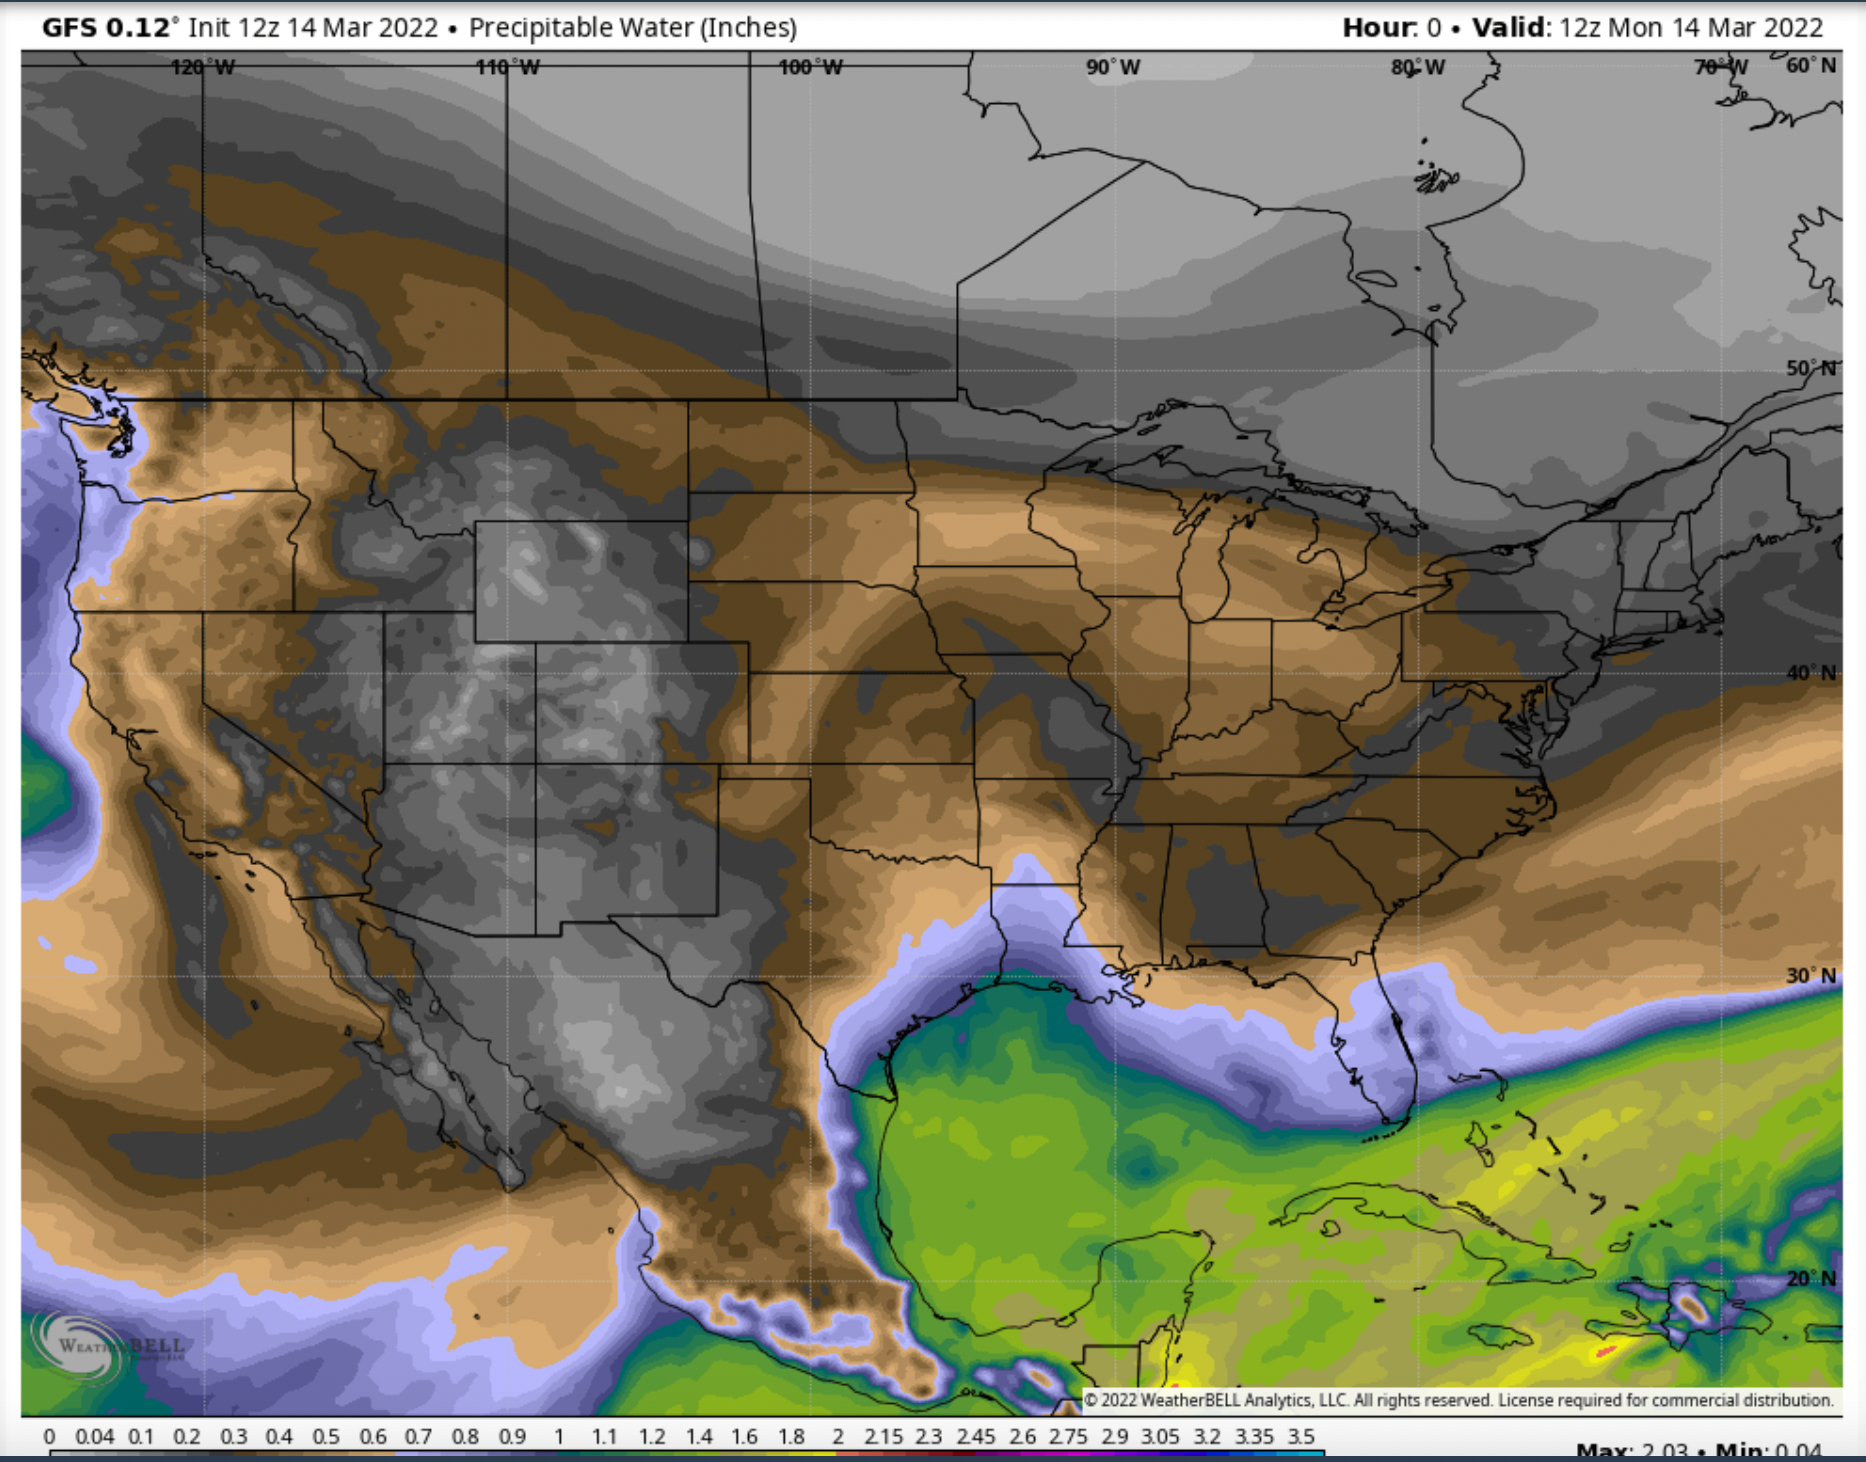 Fig. 3—GFS model-based map of Precipitable Water from WeatherBELL.